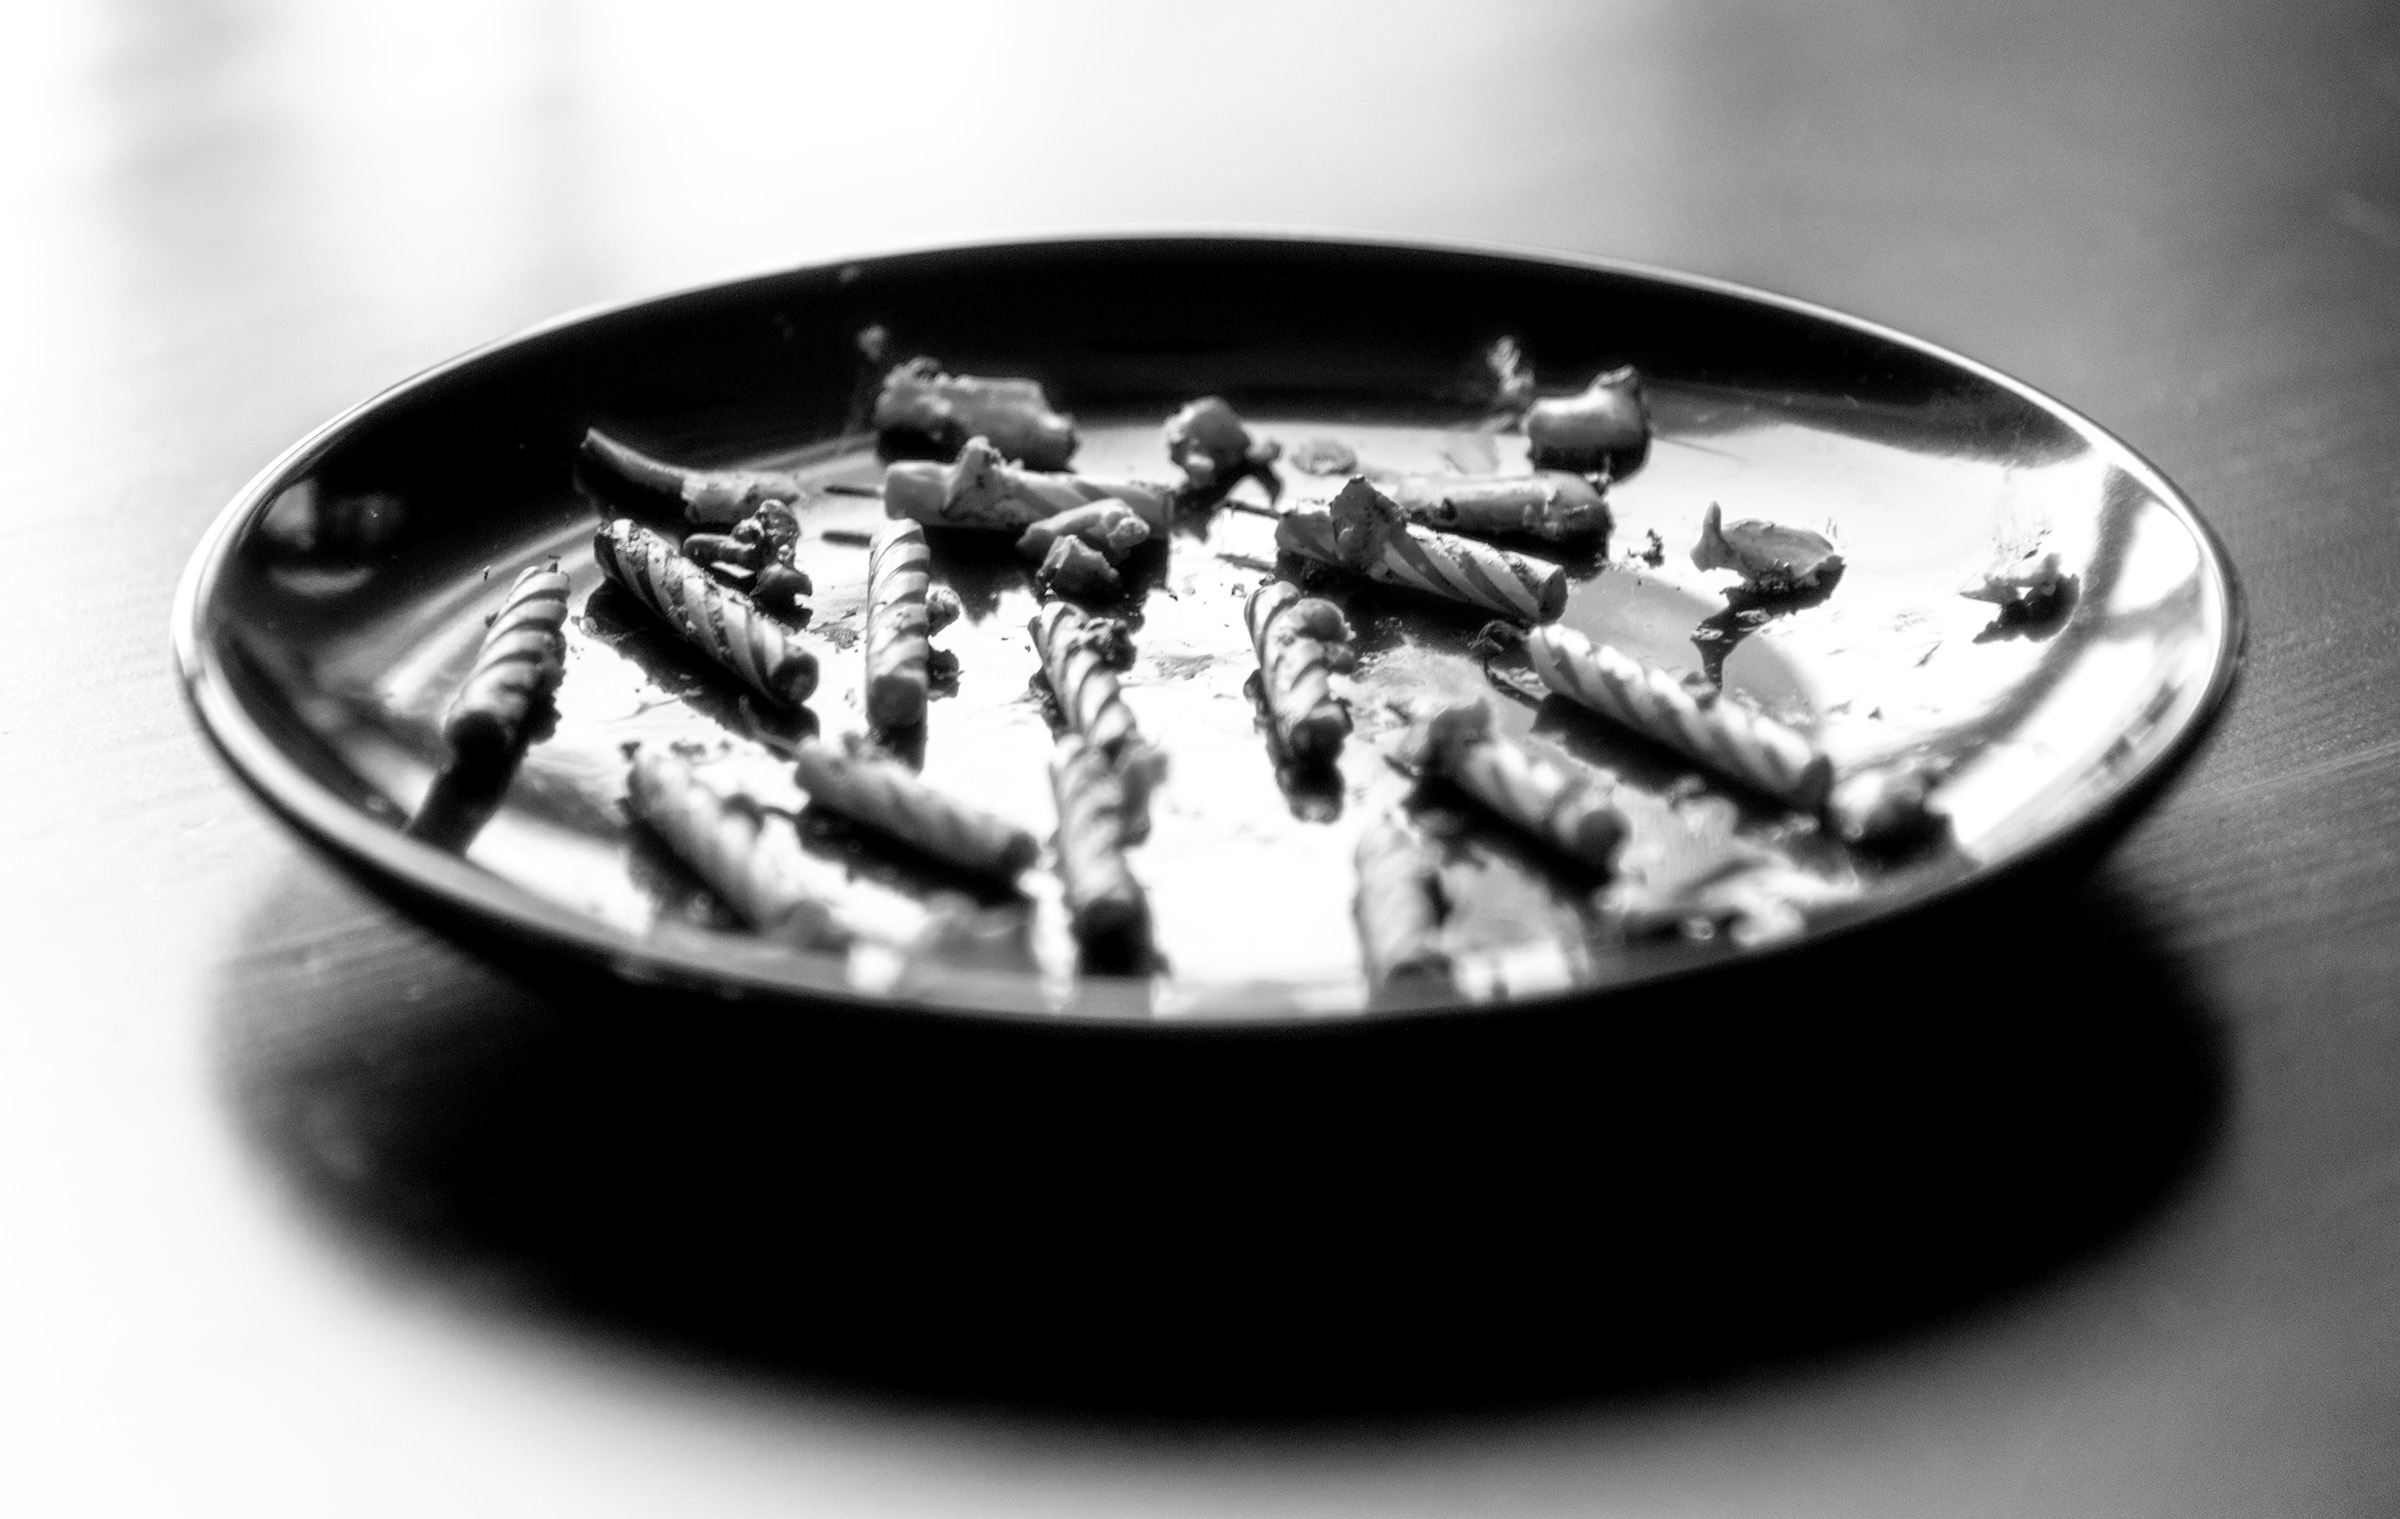 A black and white photo of a plate on a table. On the plate are 13 striped candles that have been partially melted.